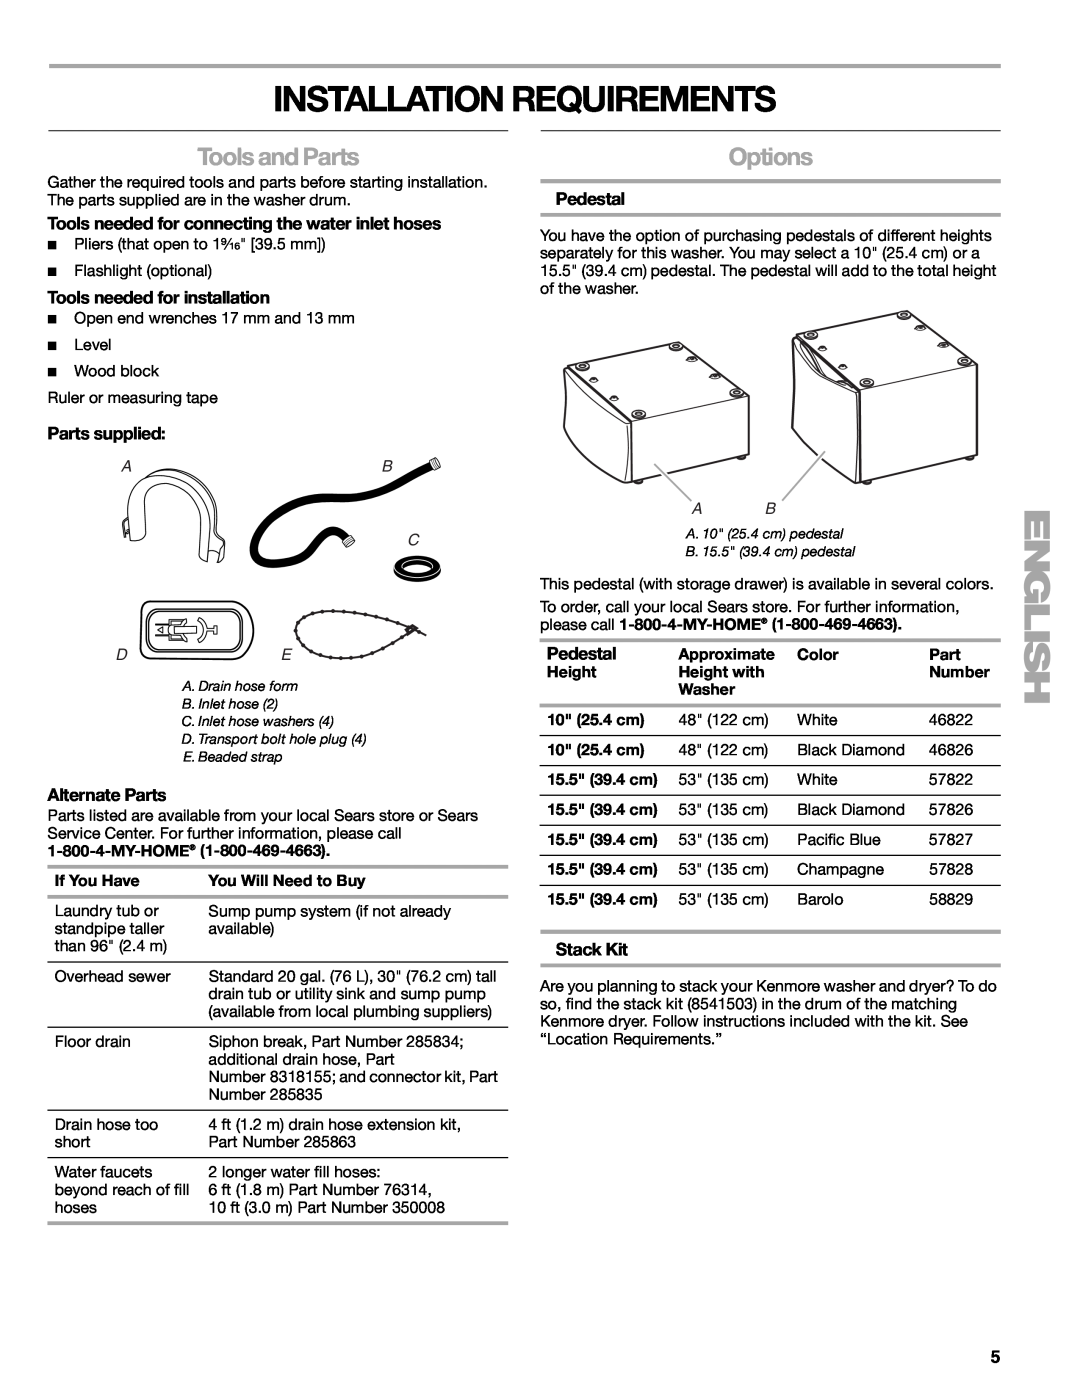 Sears 110.4778* Installation Requirements, Tools and Parts, Options, Tools needed for connecting the water inlet hoses 